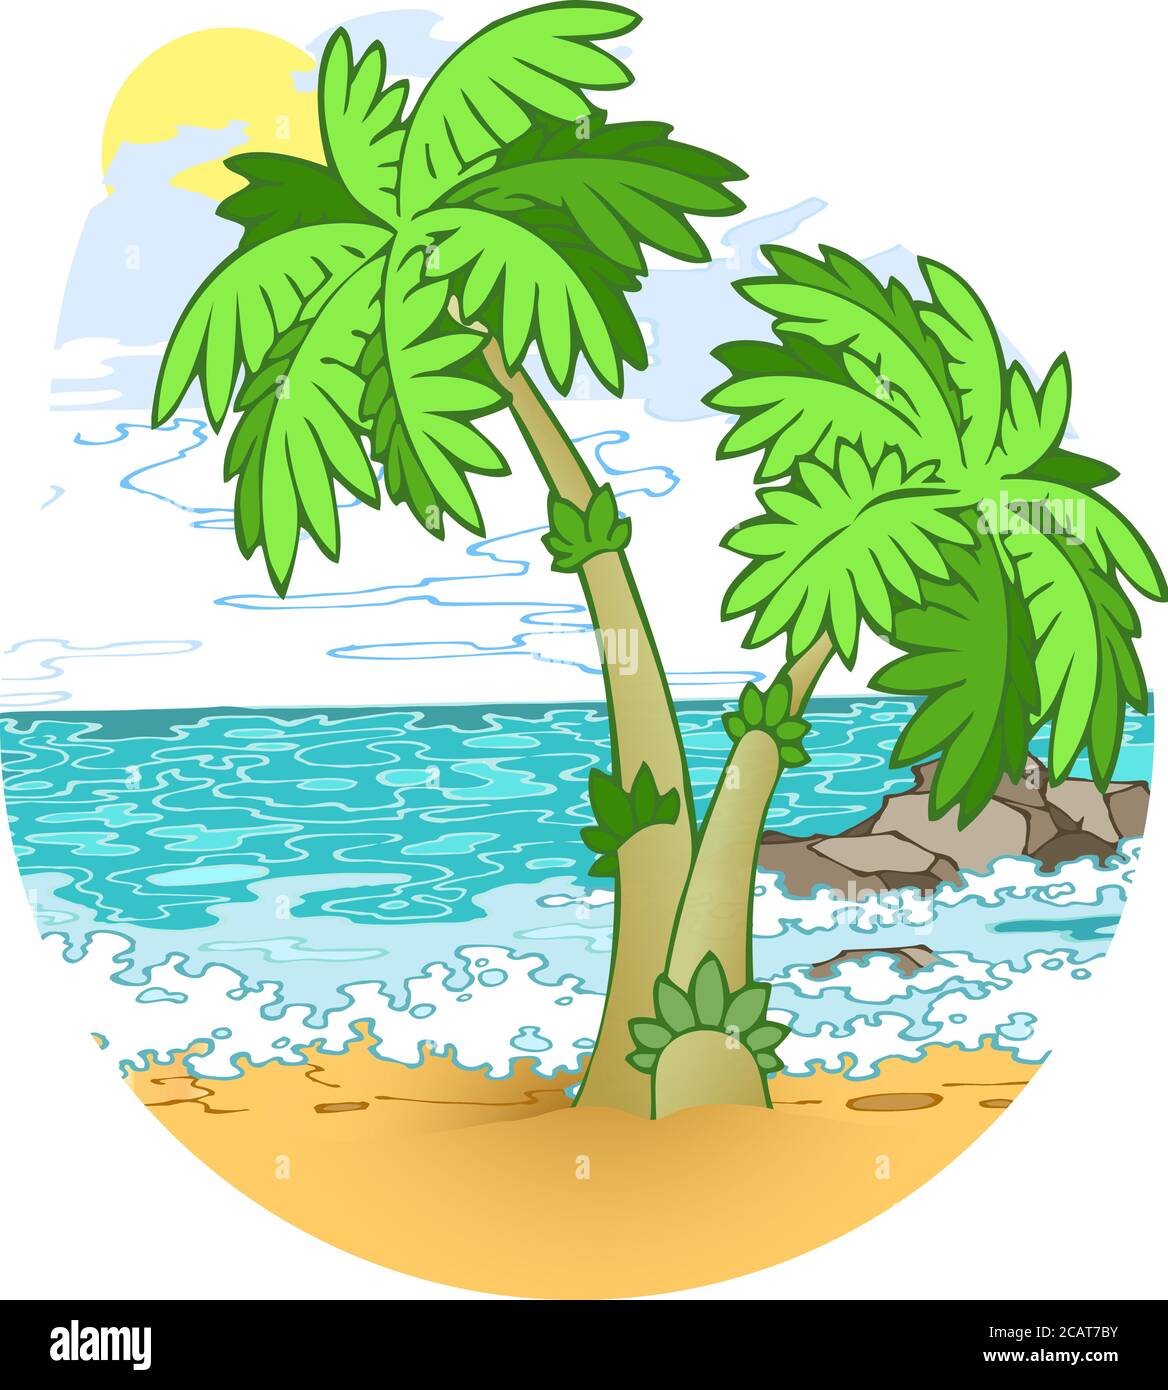 The vector illustration shows a part of the beach with palm trees in the background of the sea. Stock Vector